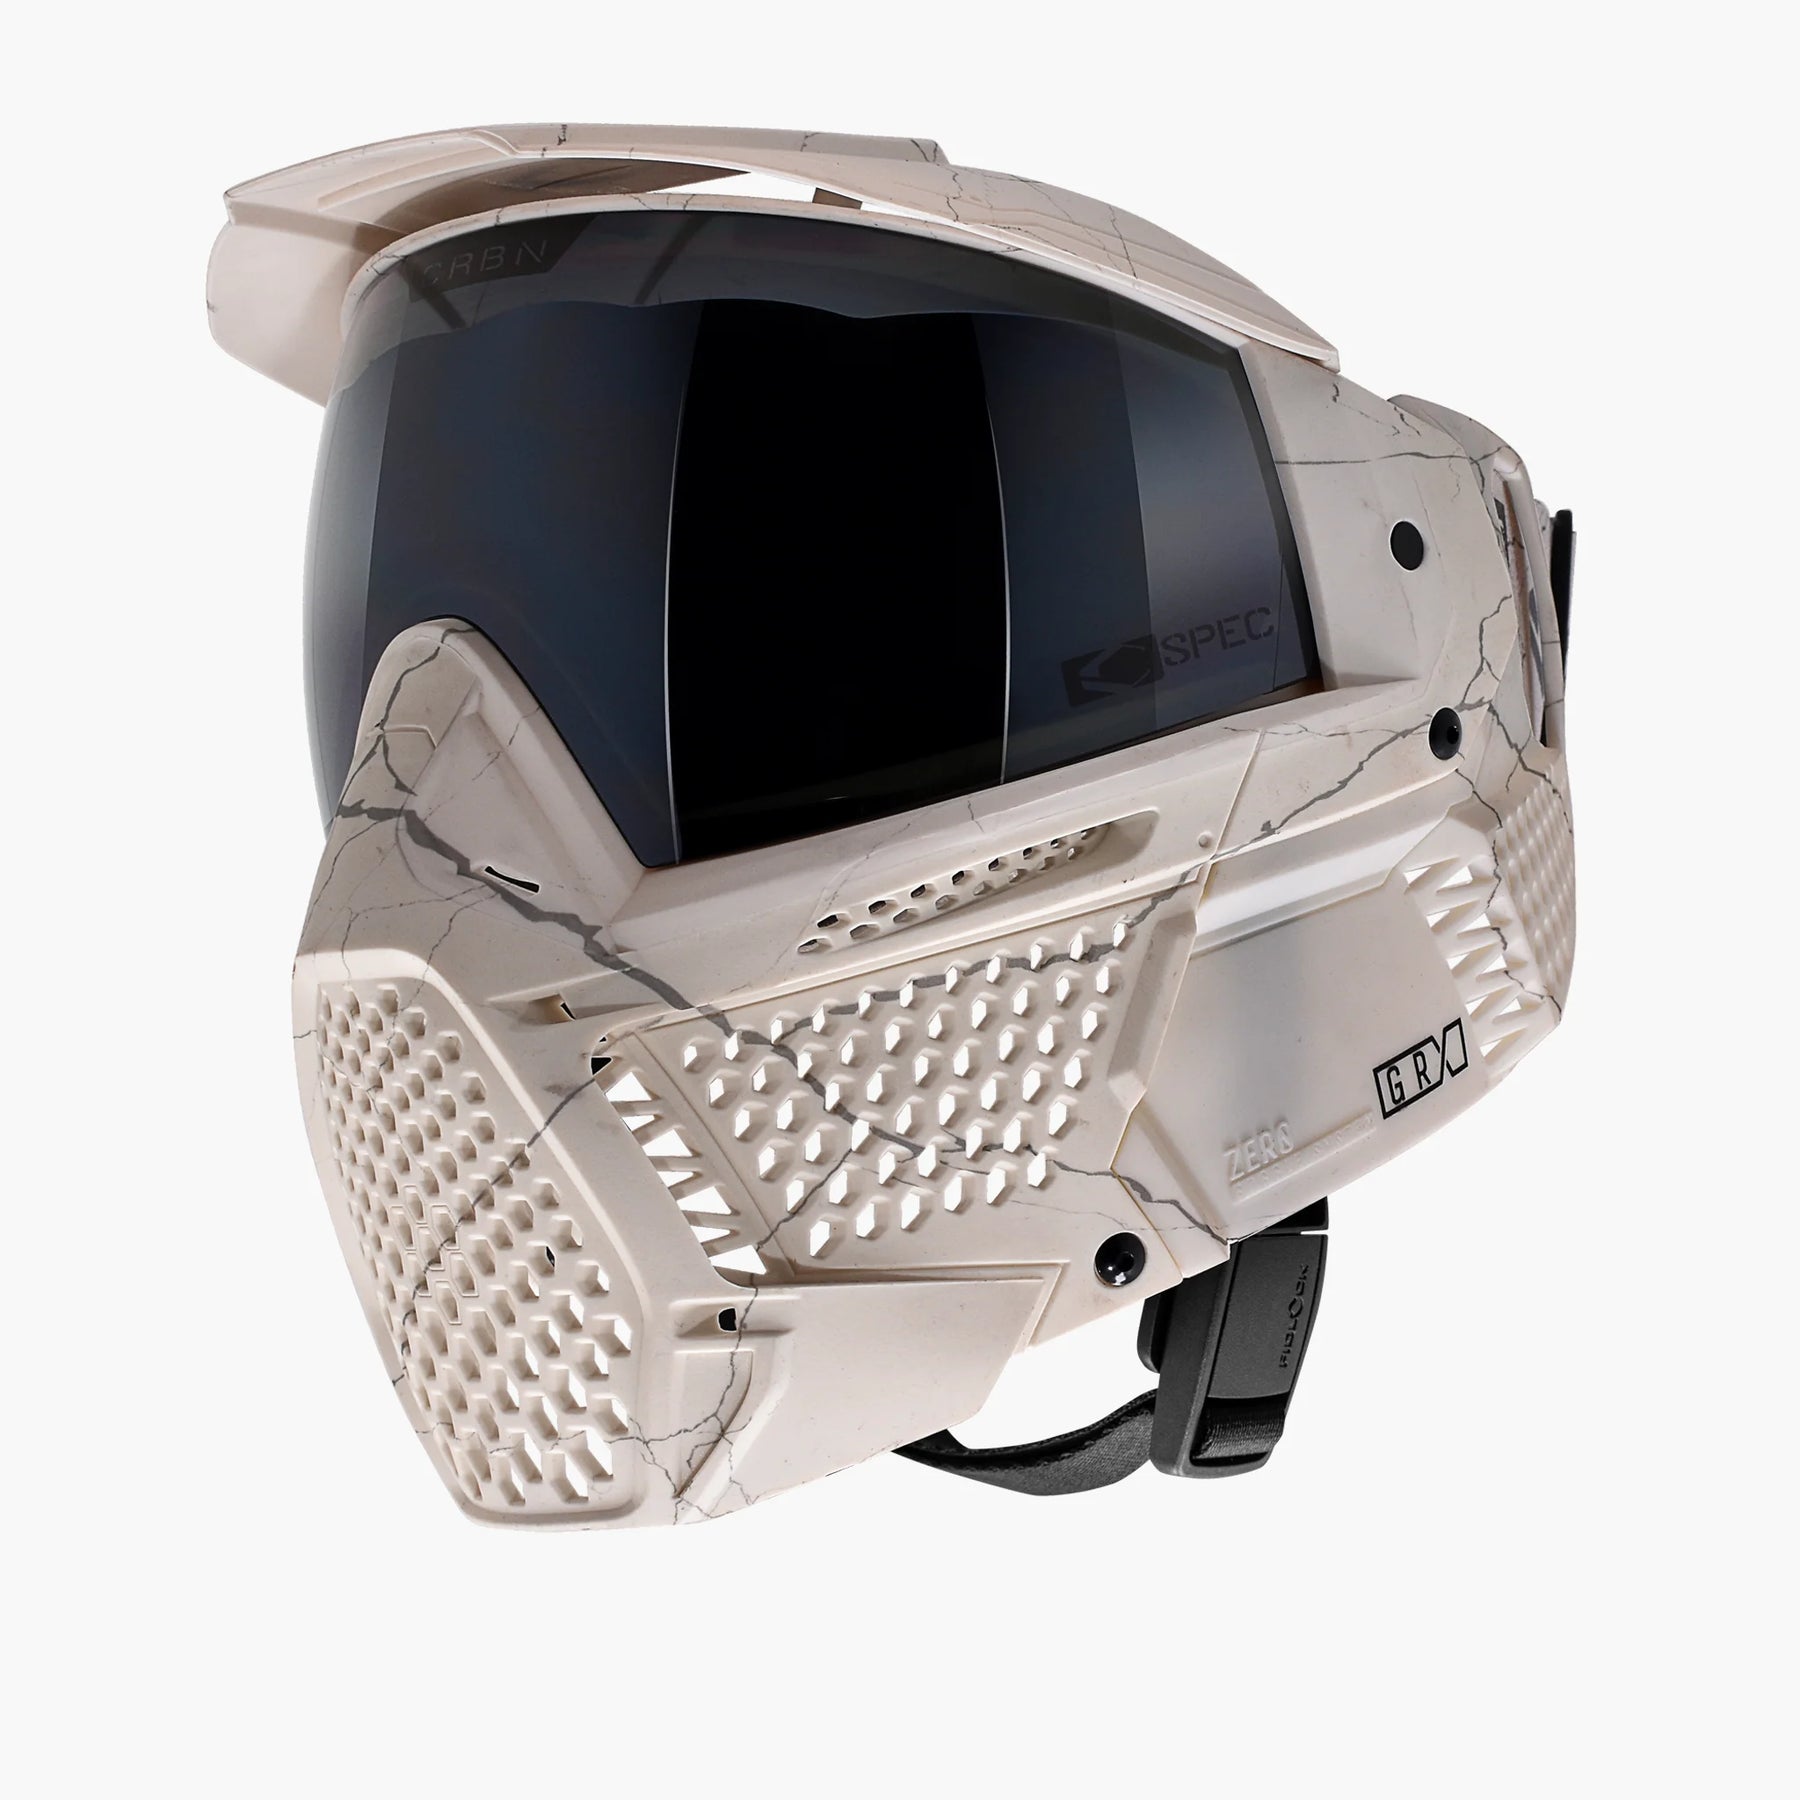 CRBN zero GRX fracture bone - Less/More coverage - Paintball Goggles